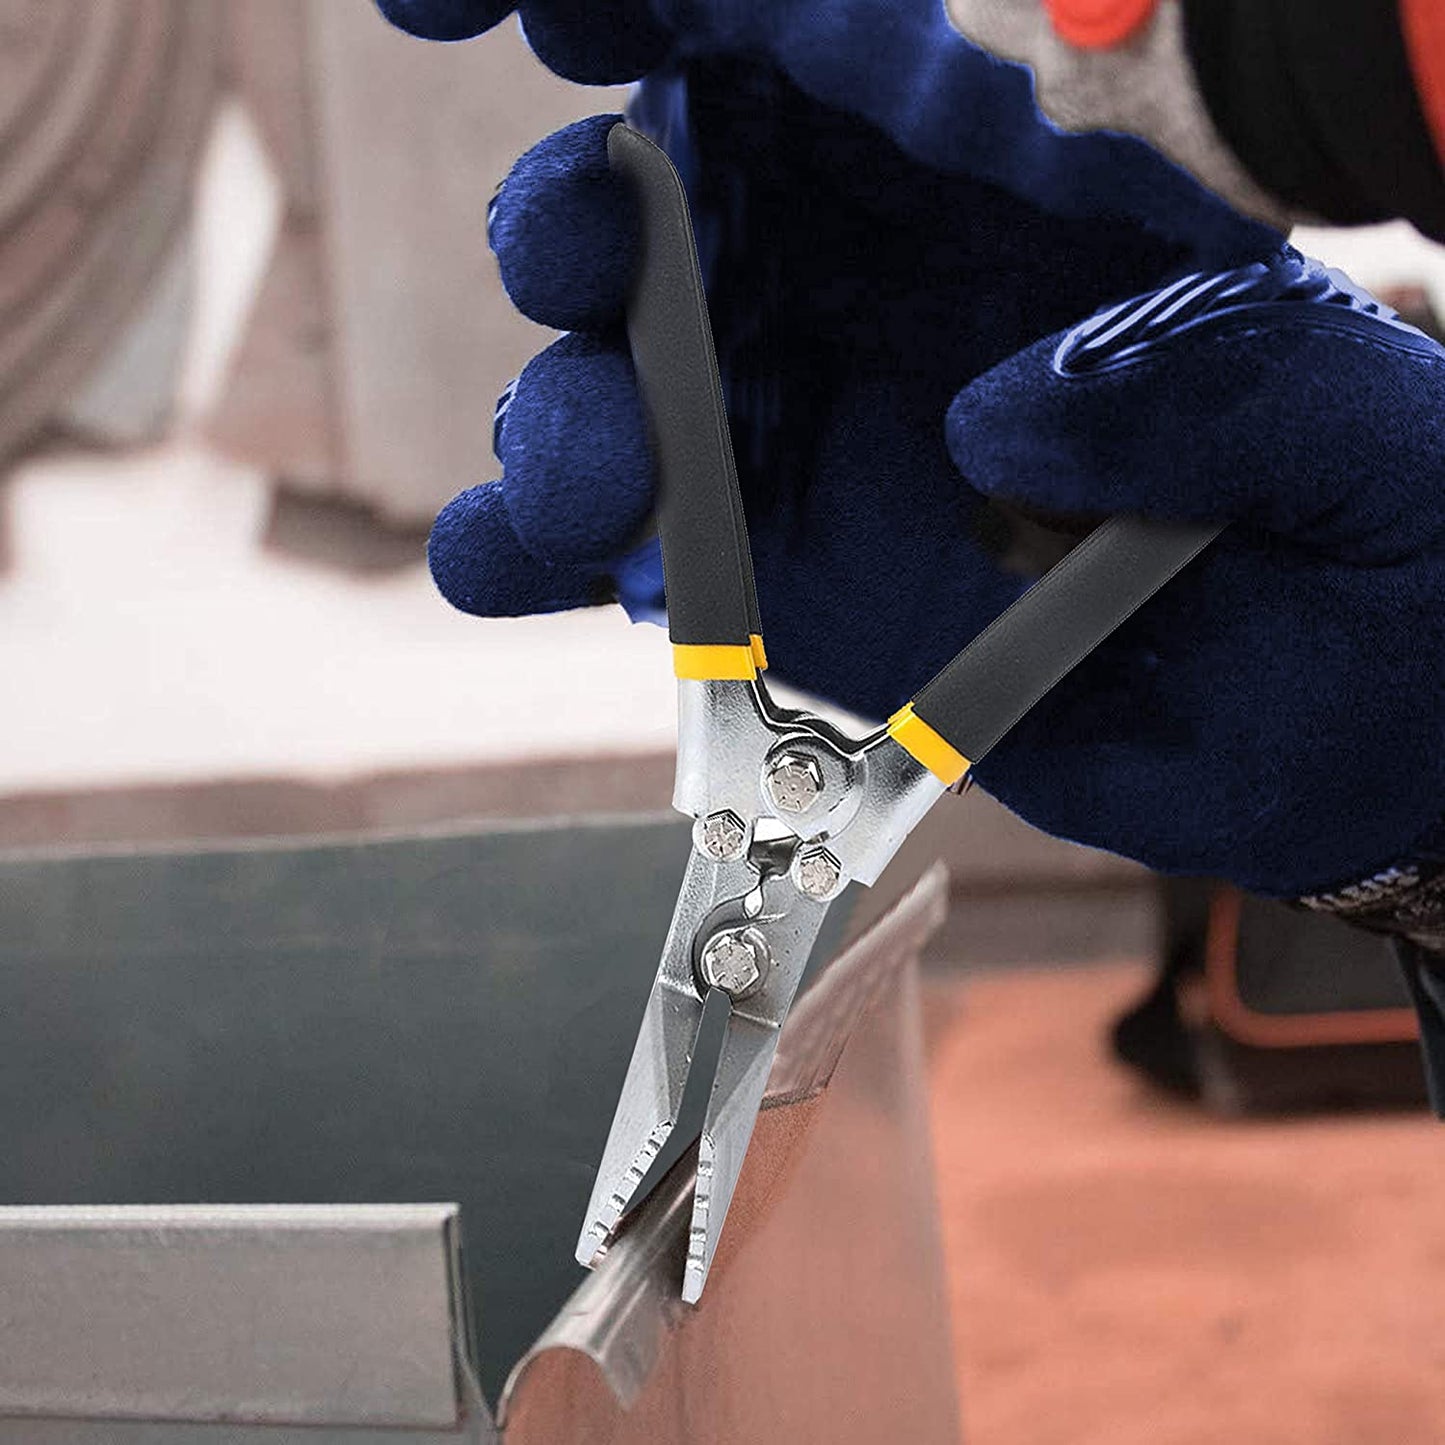 A person wearing blue gloves is using a pair of High Quality Sheet Metal Hand Seamers - Multiple Sizes Available by Perma Cover to bend a metal sheet. The heavy-duty all-steel pliers have black handles with yellow accents. The background includes blurred industrial equipment and fabrics.